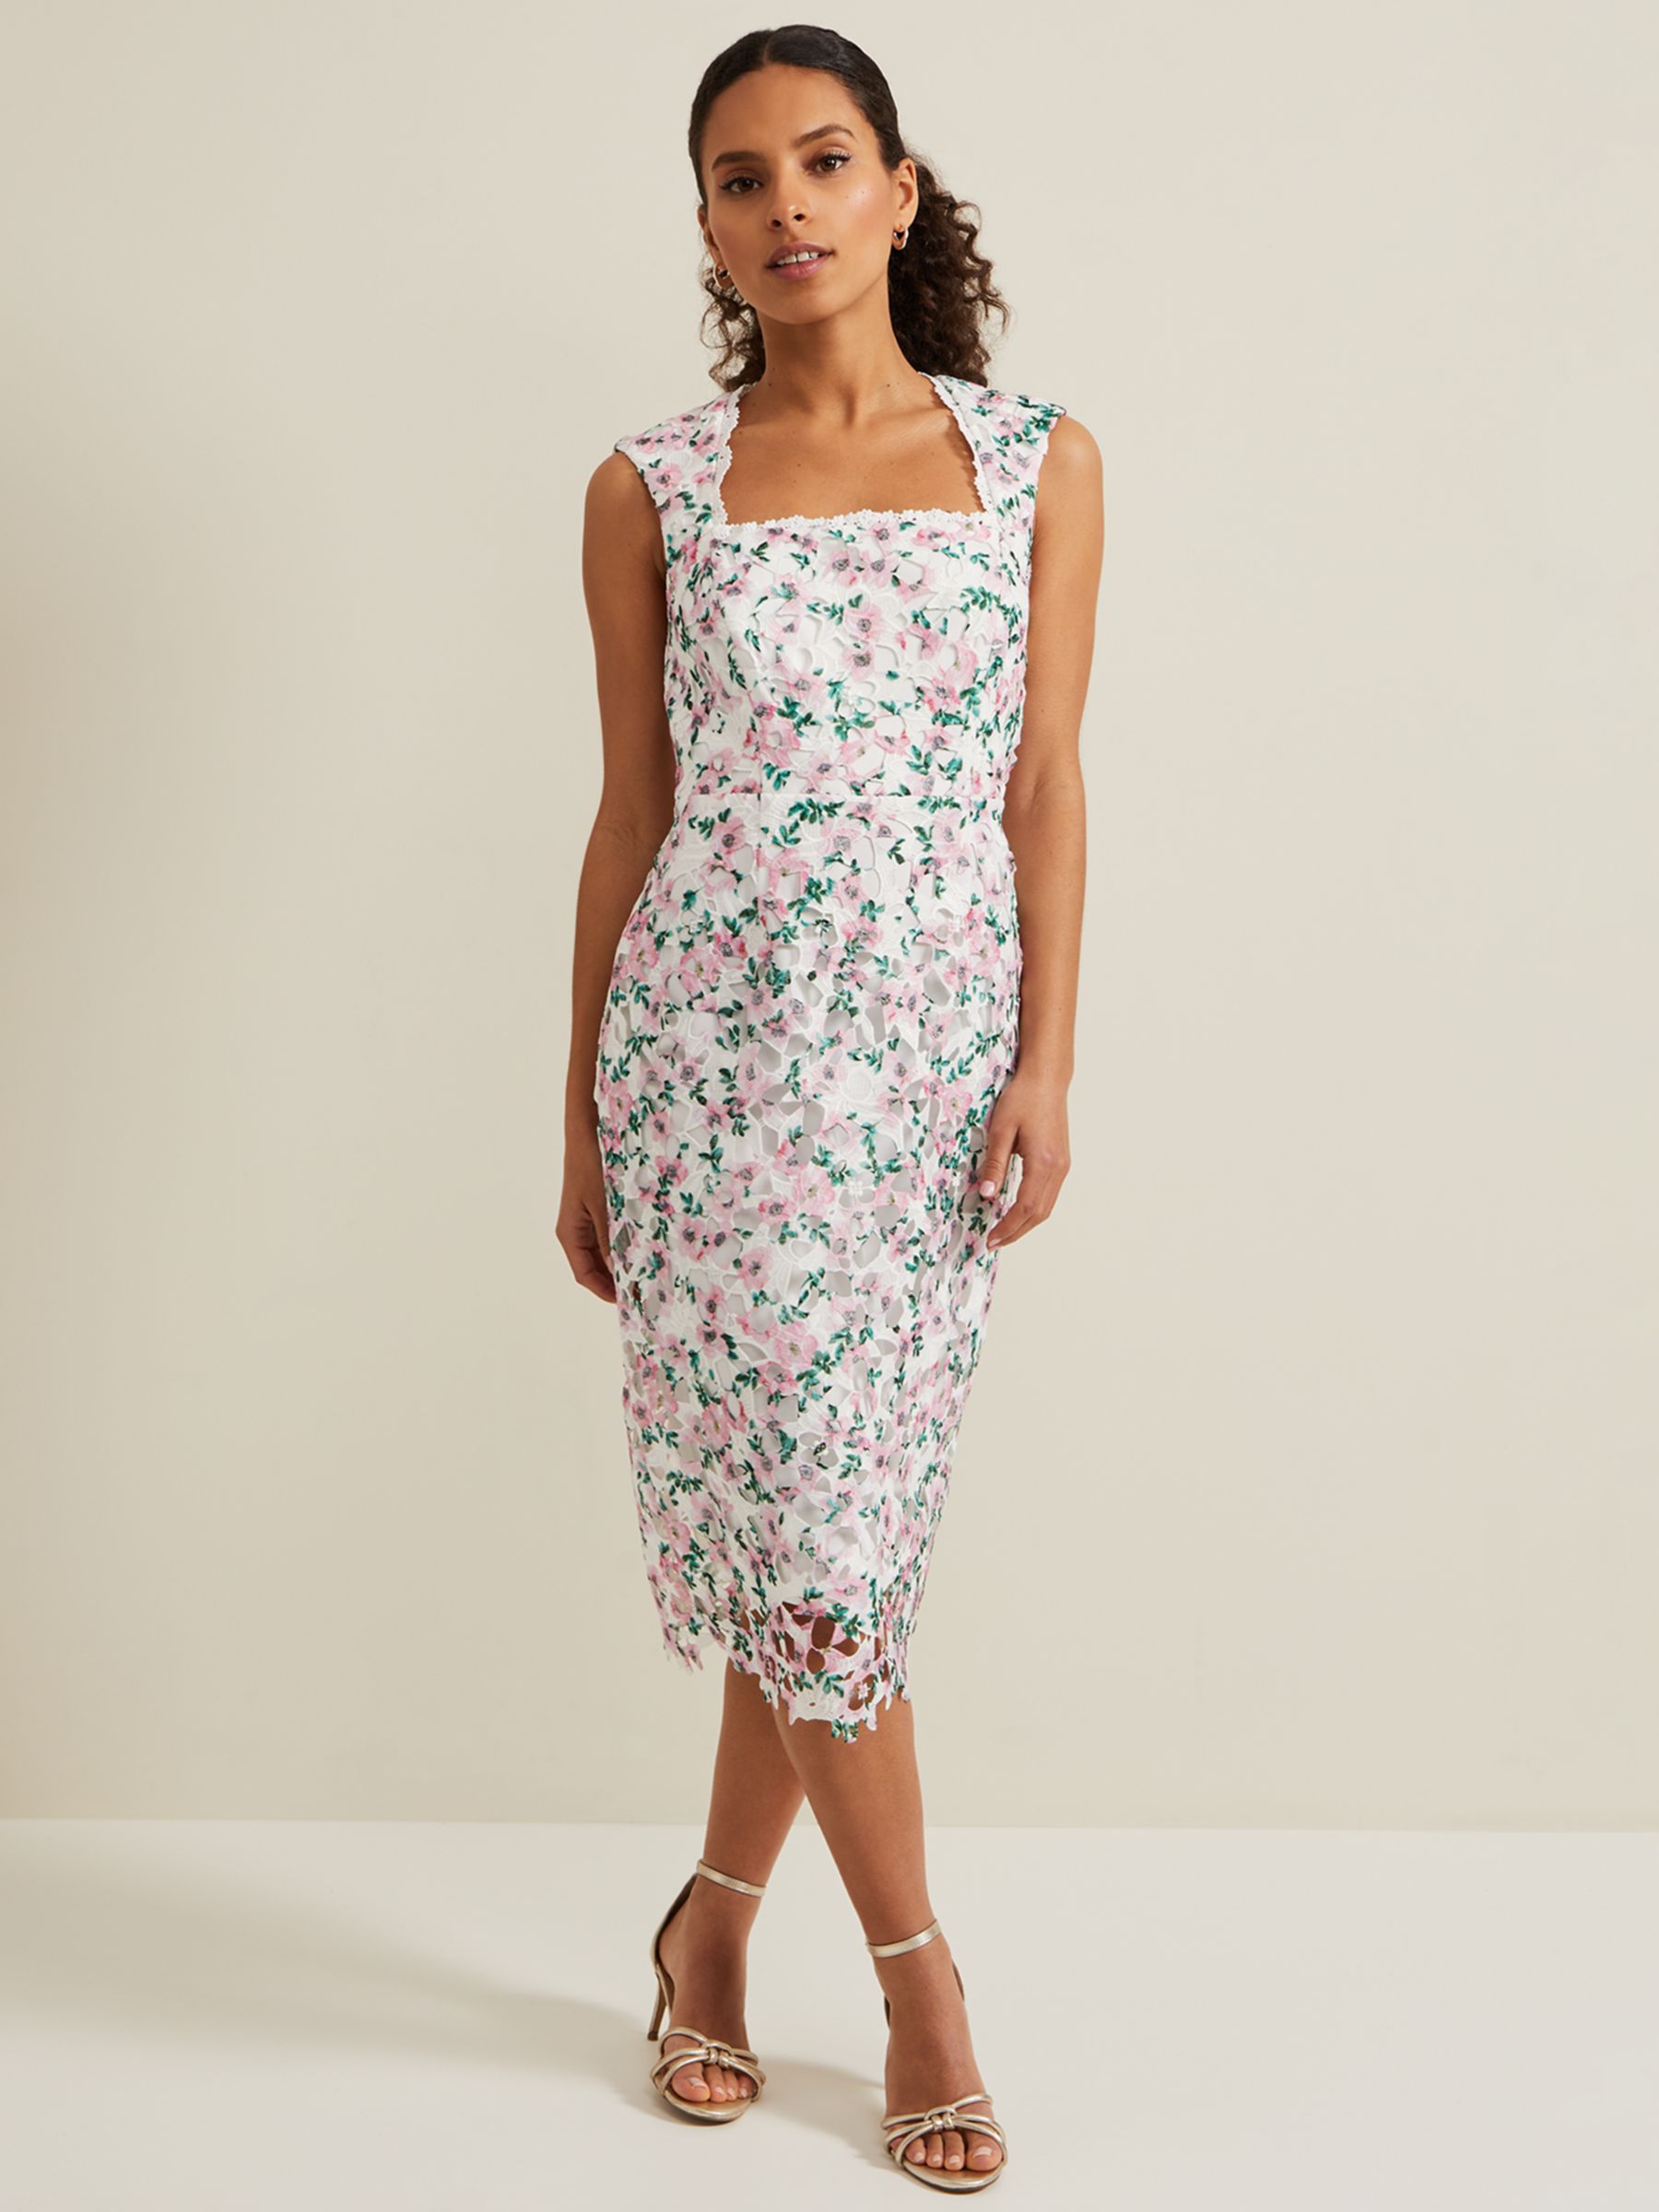 Buy Phase Eight Petite Diana Floral Lace Midi Dress, White/Multi Online at johnlewis.com